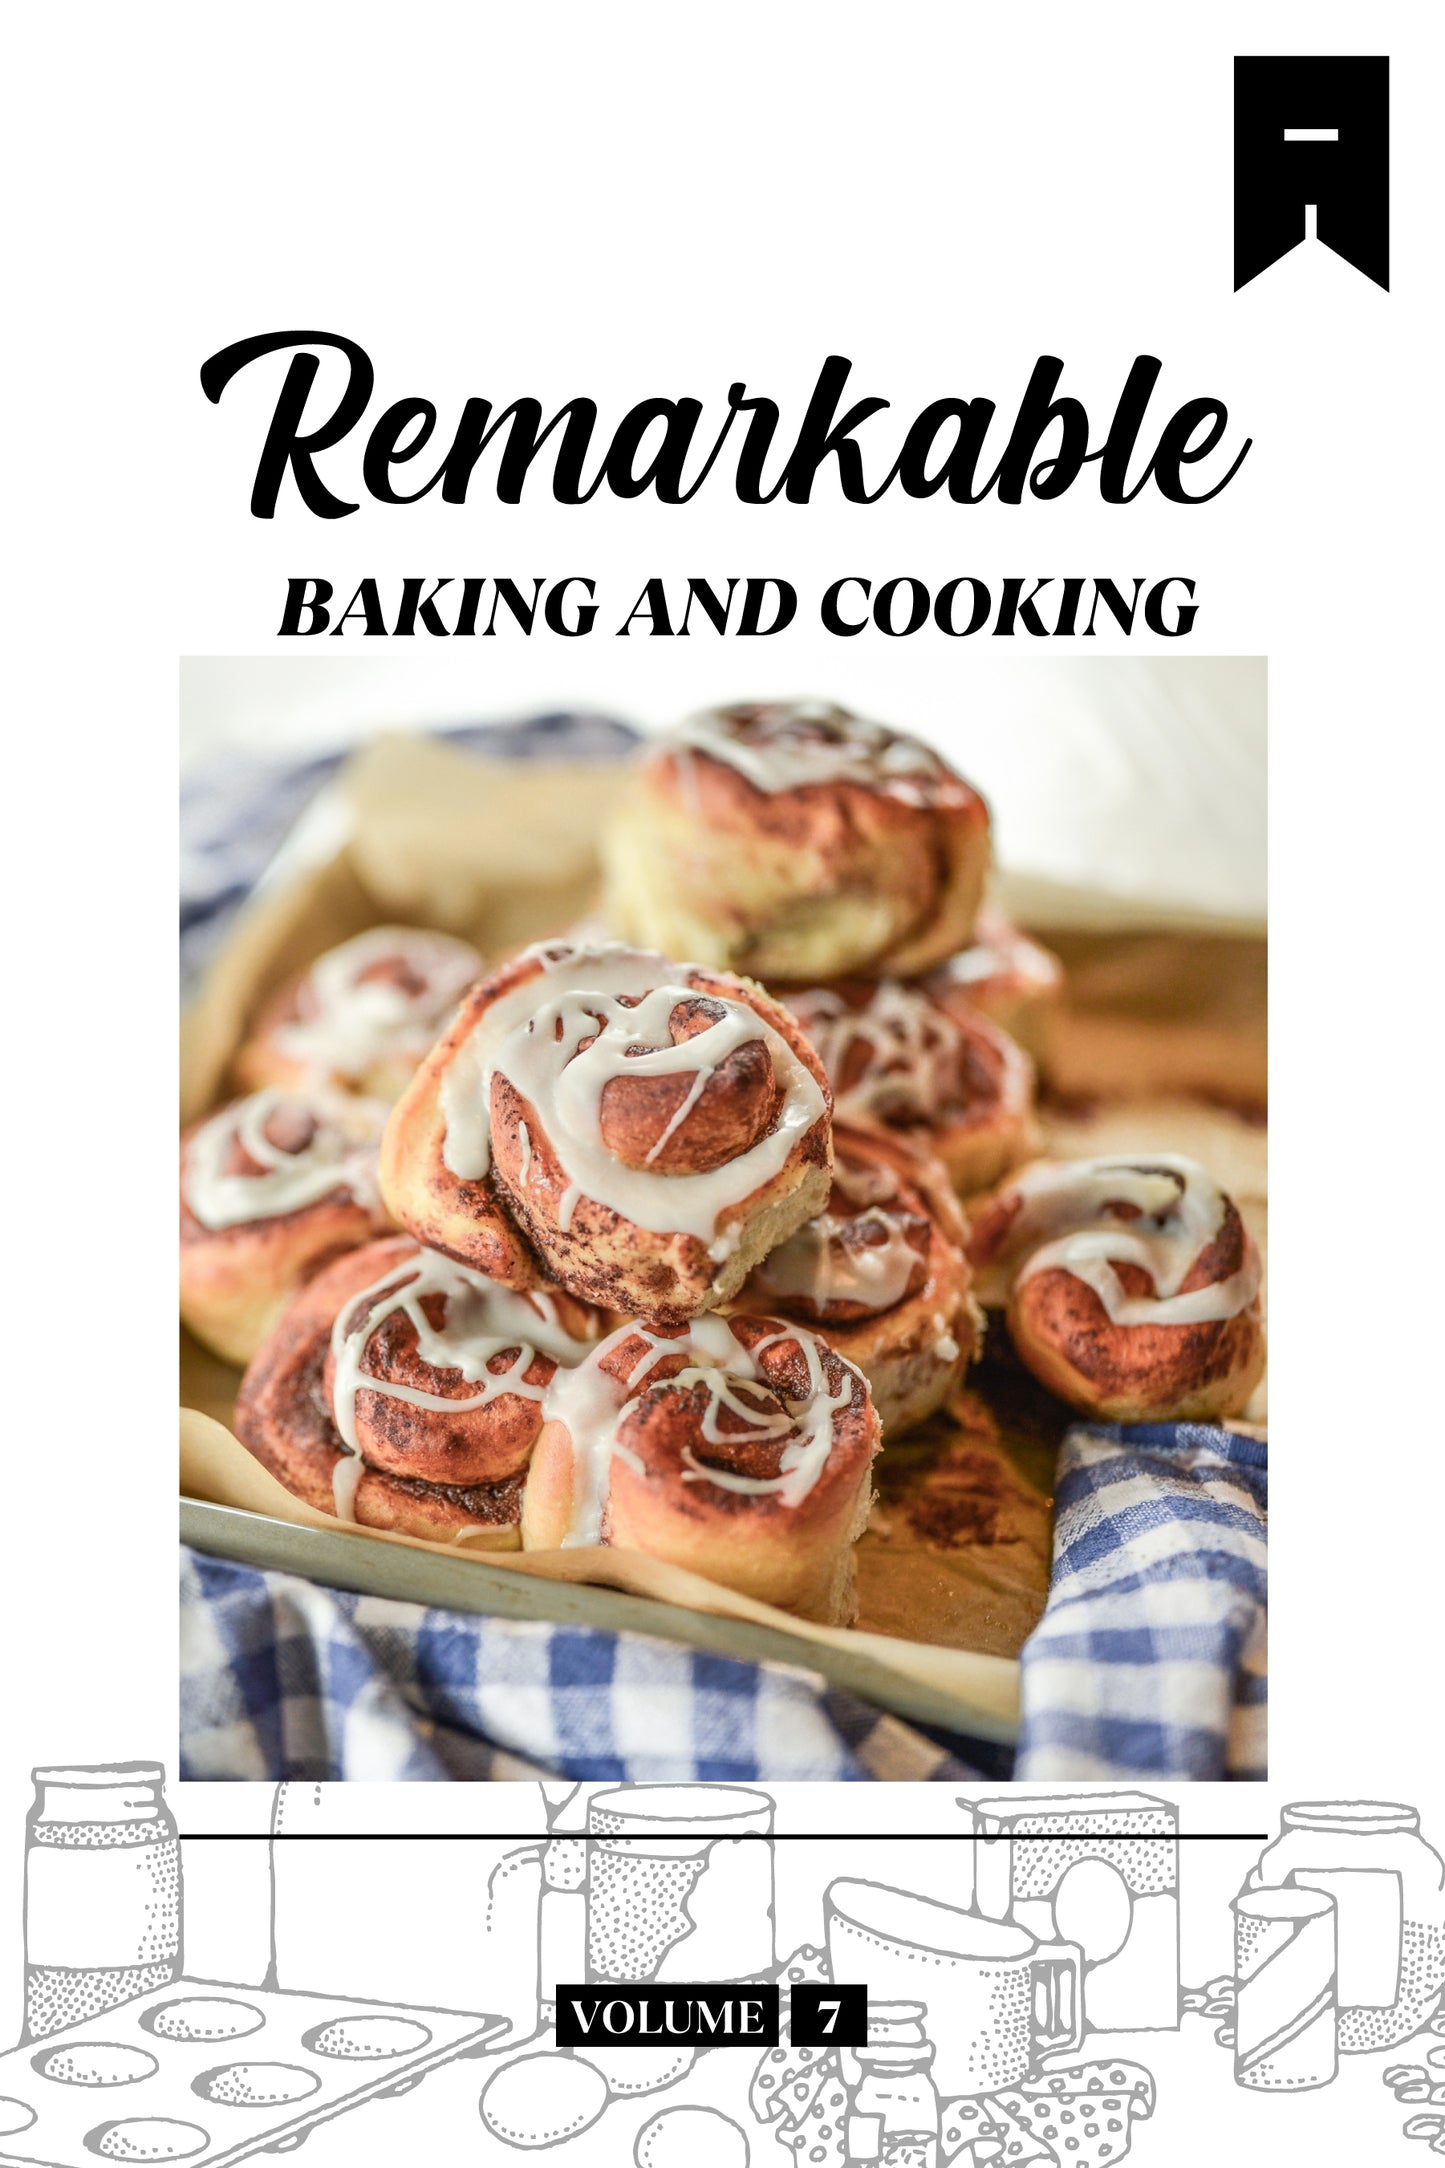 Remarkable Baking (Volume 7) - Physical Book